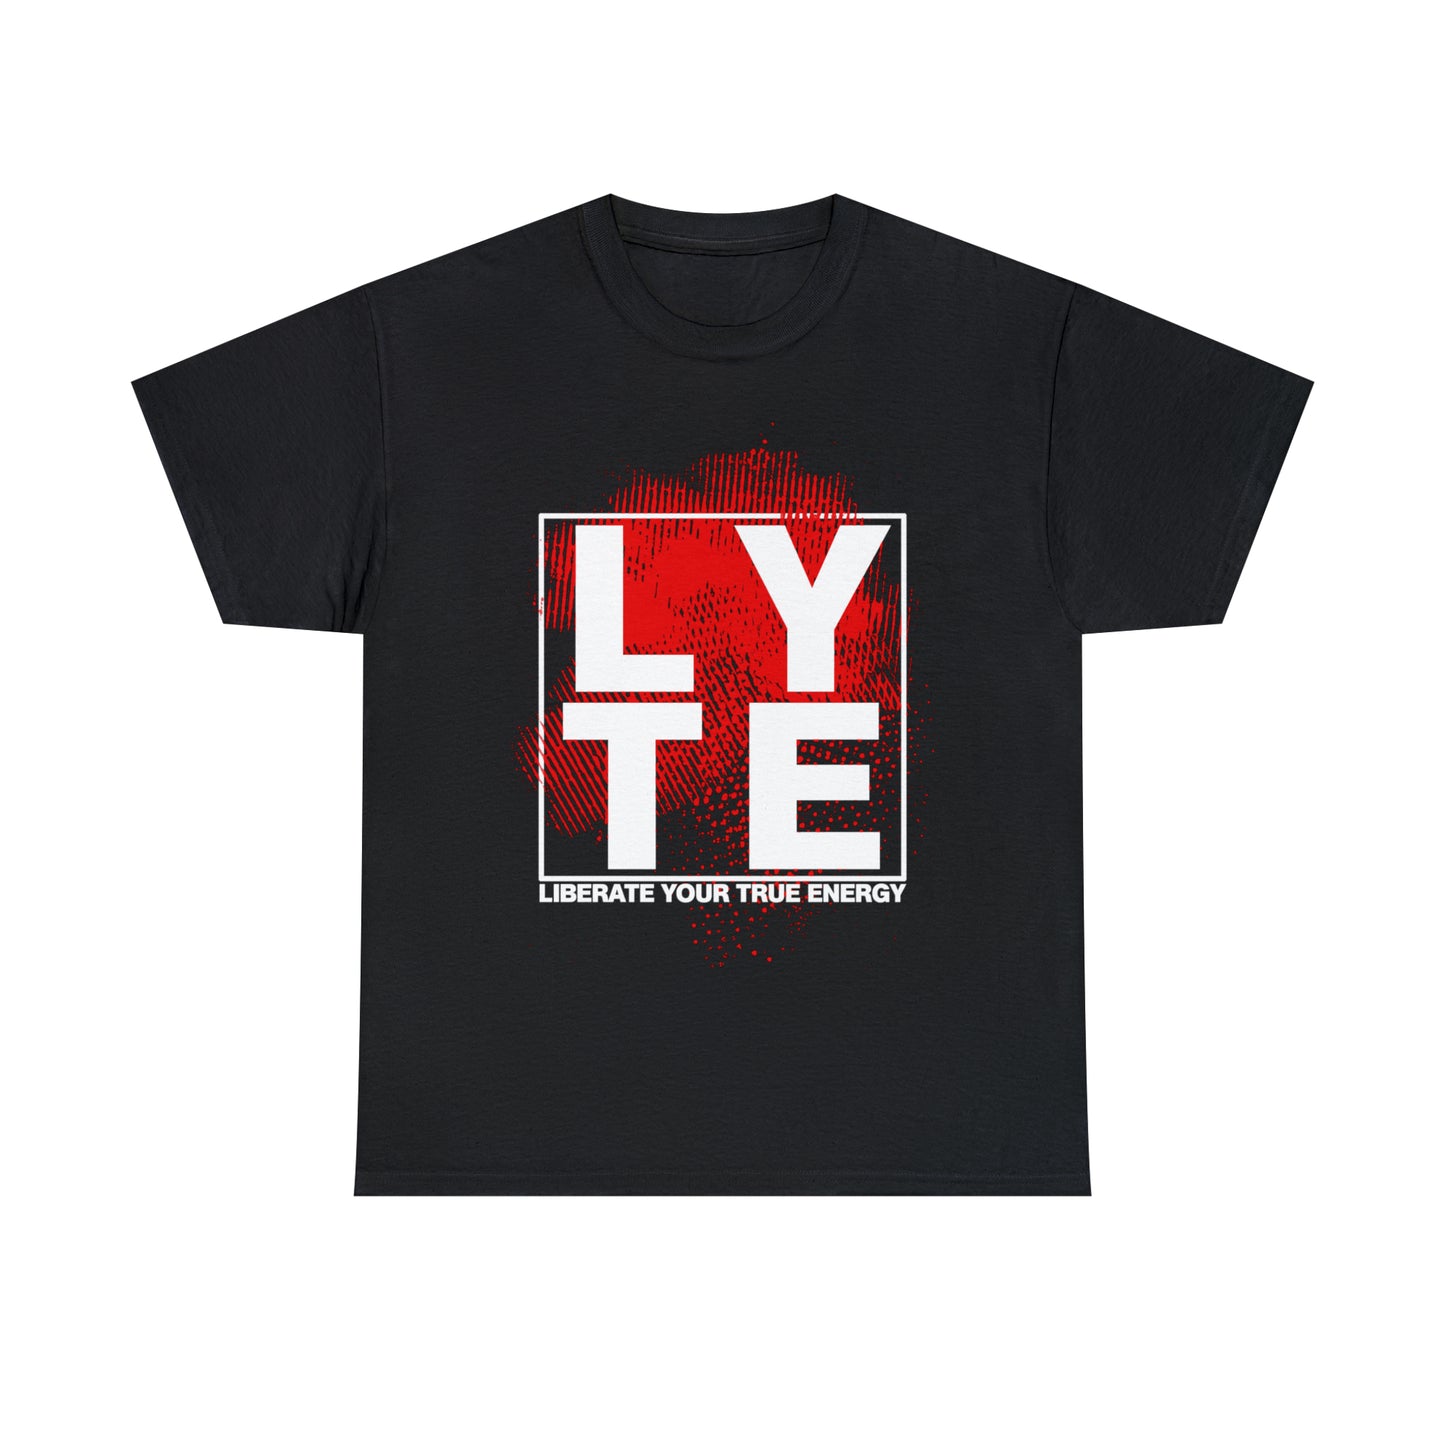 Lyte "Liberate Your True Energy" T-Shirt